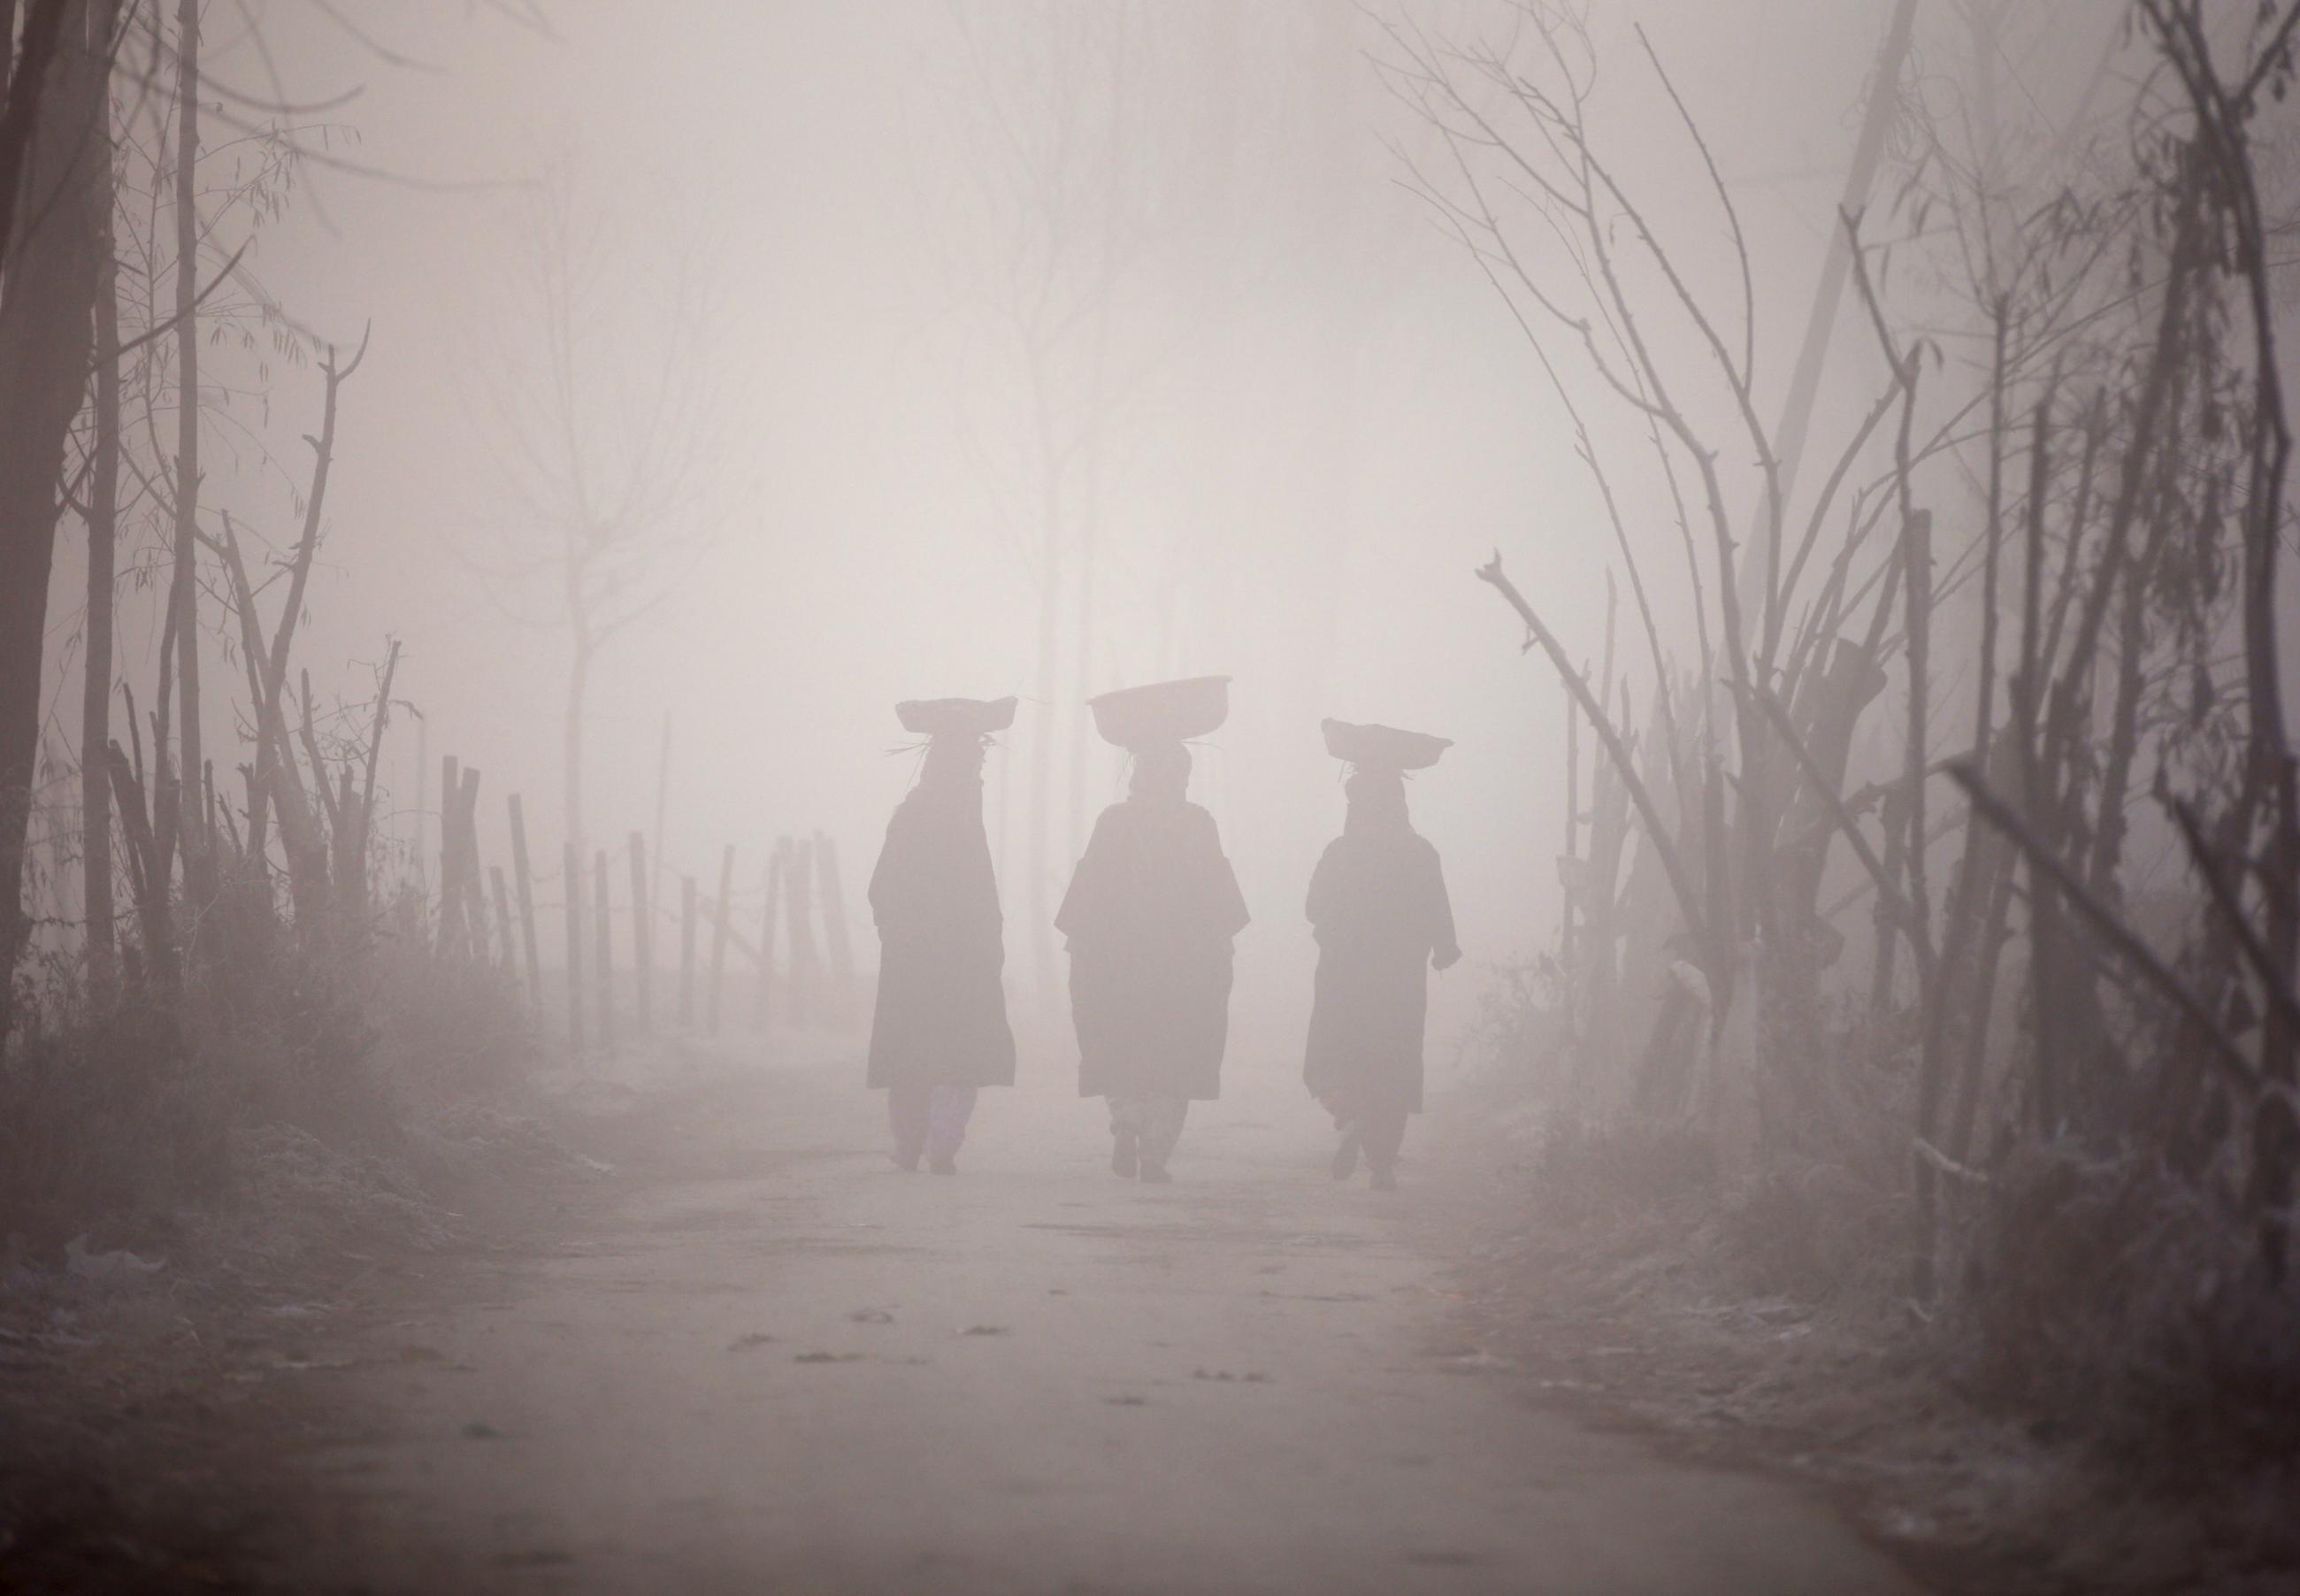 Kashmiri women carry baskets on their heads as they walk along the road amid dense fog on a cold morning in Srinagar, India, on November 30, 2015.